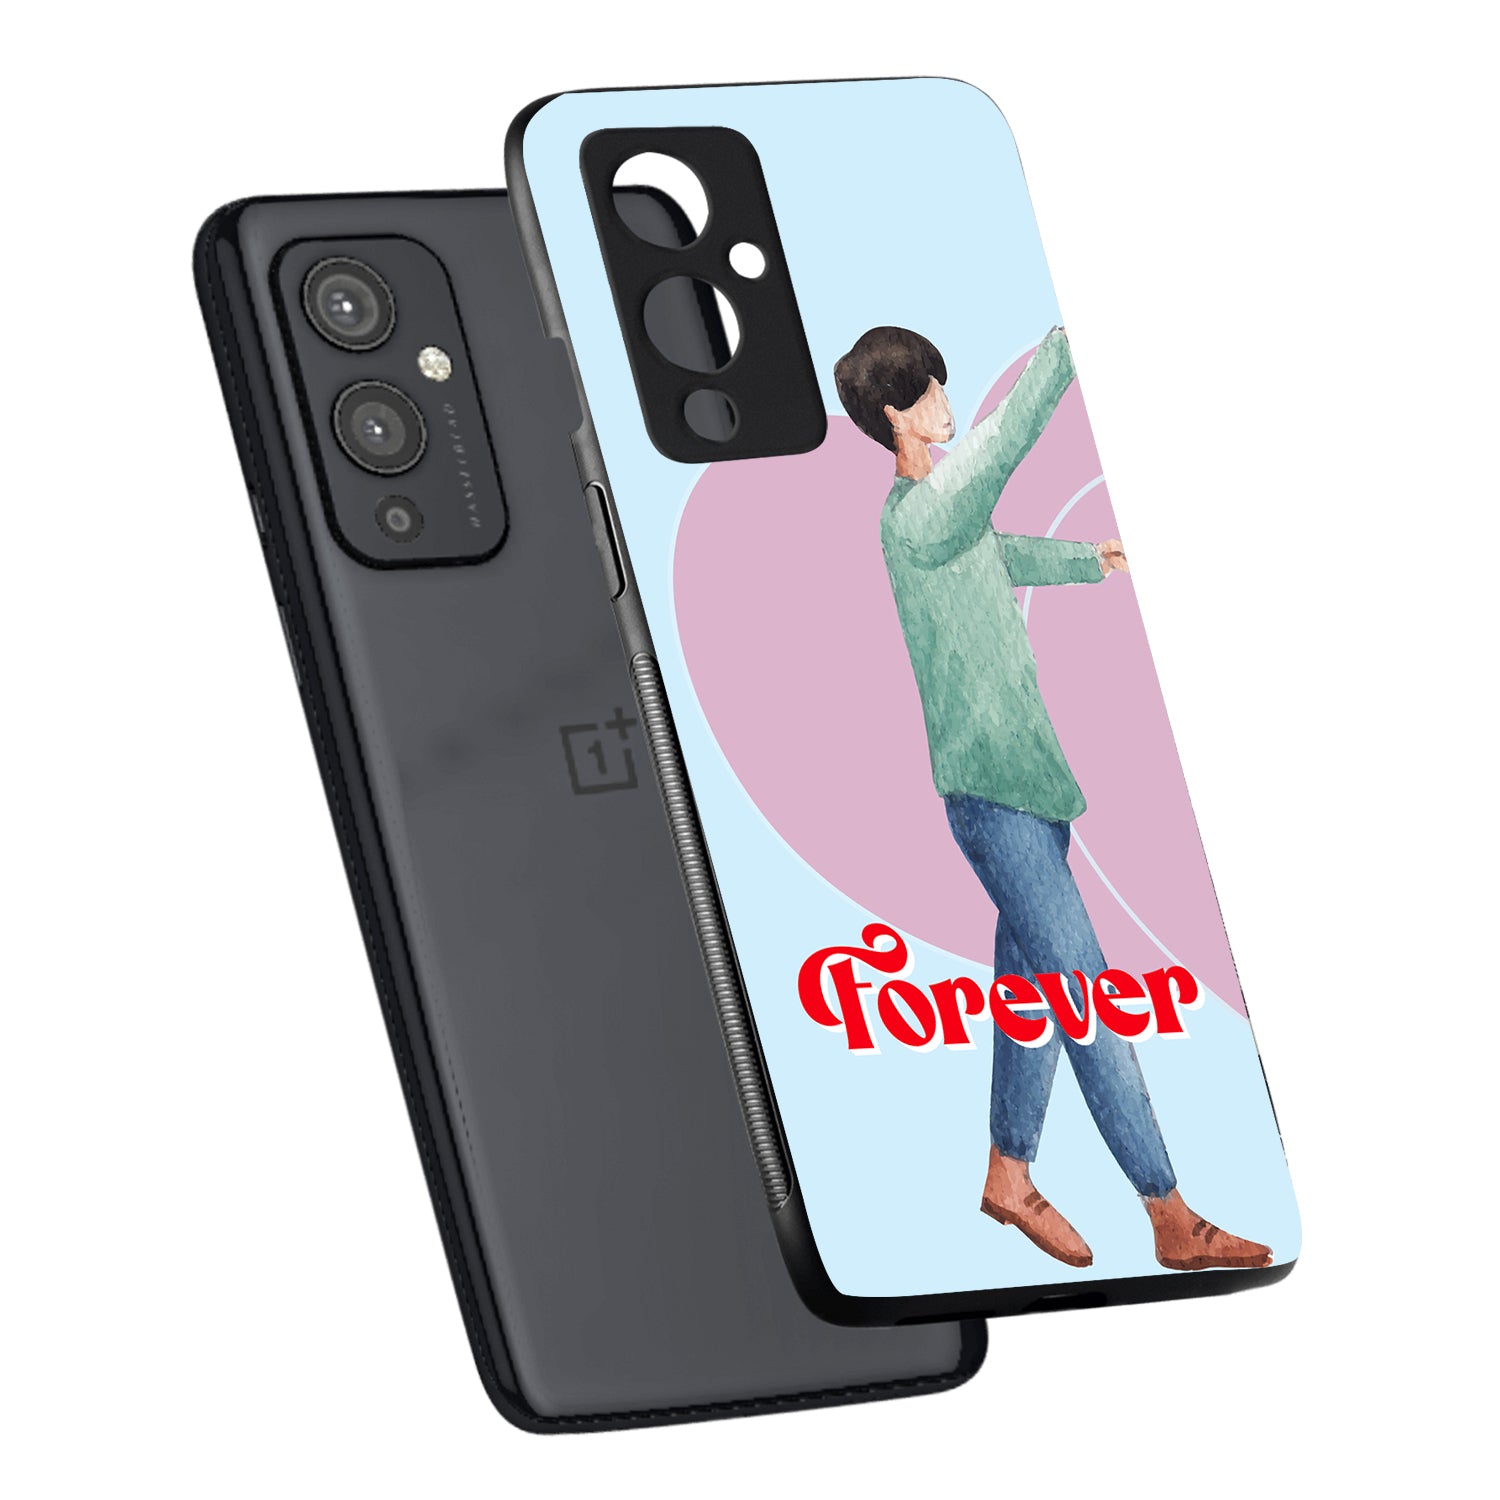 Forever Love Boy Couple Oneplus 9 Back Case